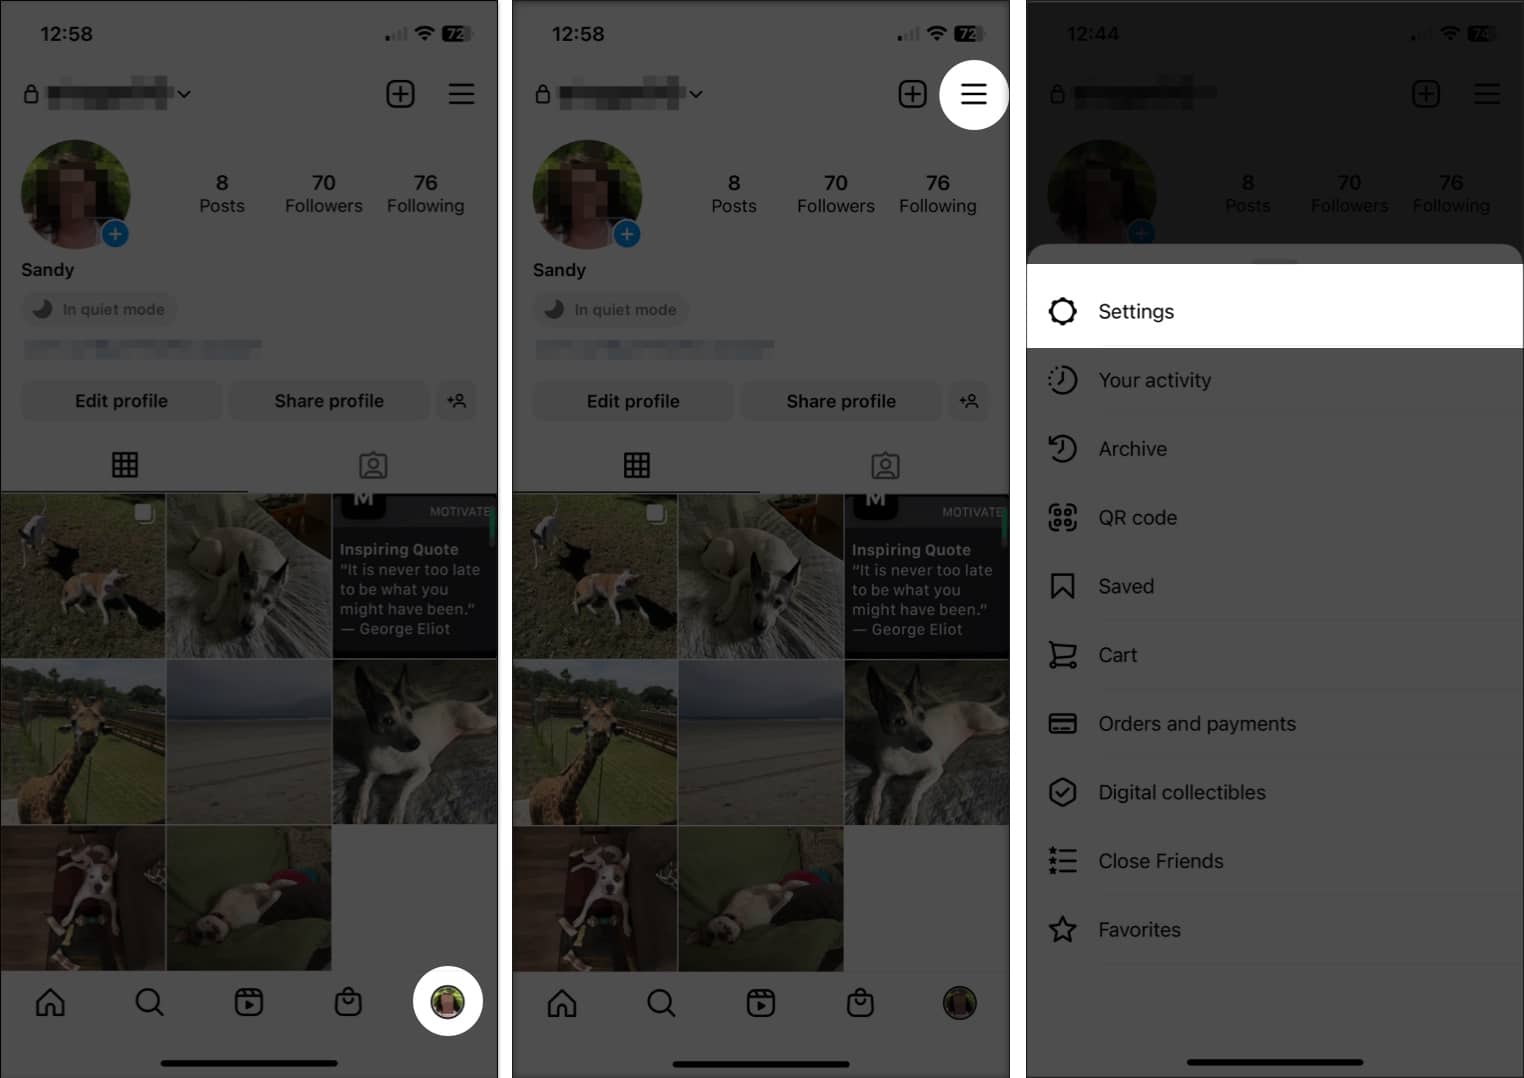 To turn on Quiet Mode on Instagram, open the Instagram app, tap your profile picture, Select the hamburger menu, pick Settings